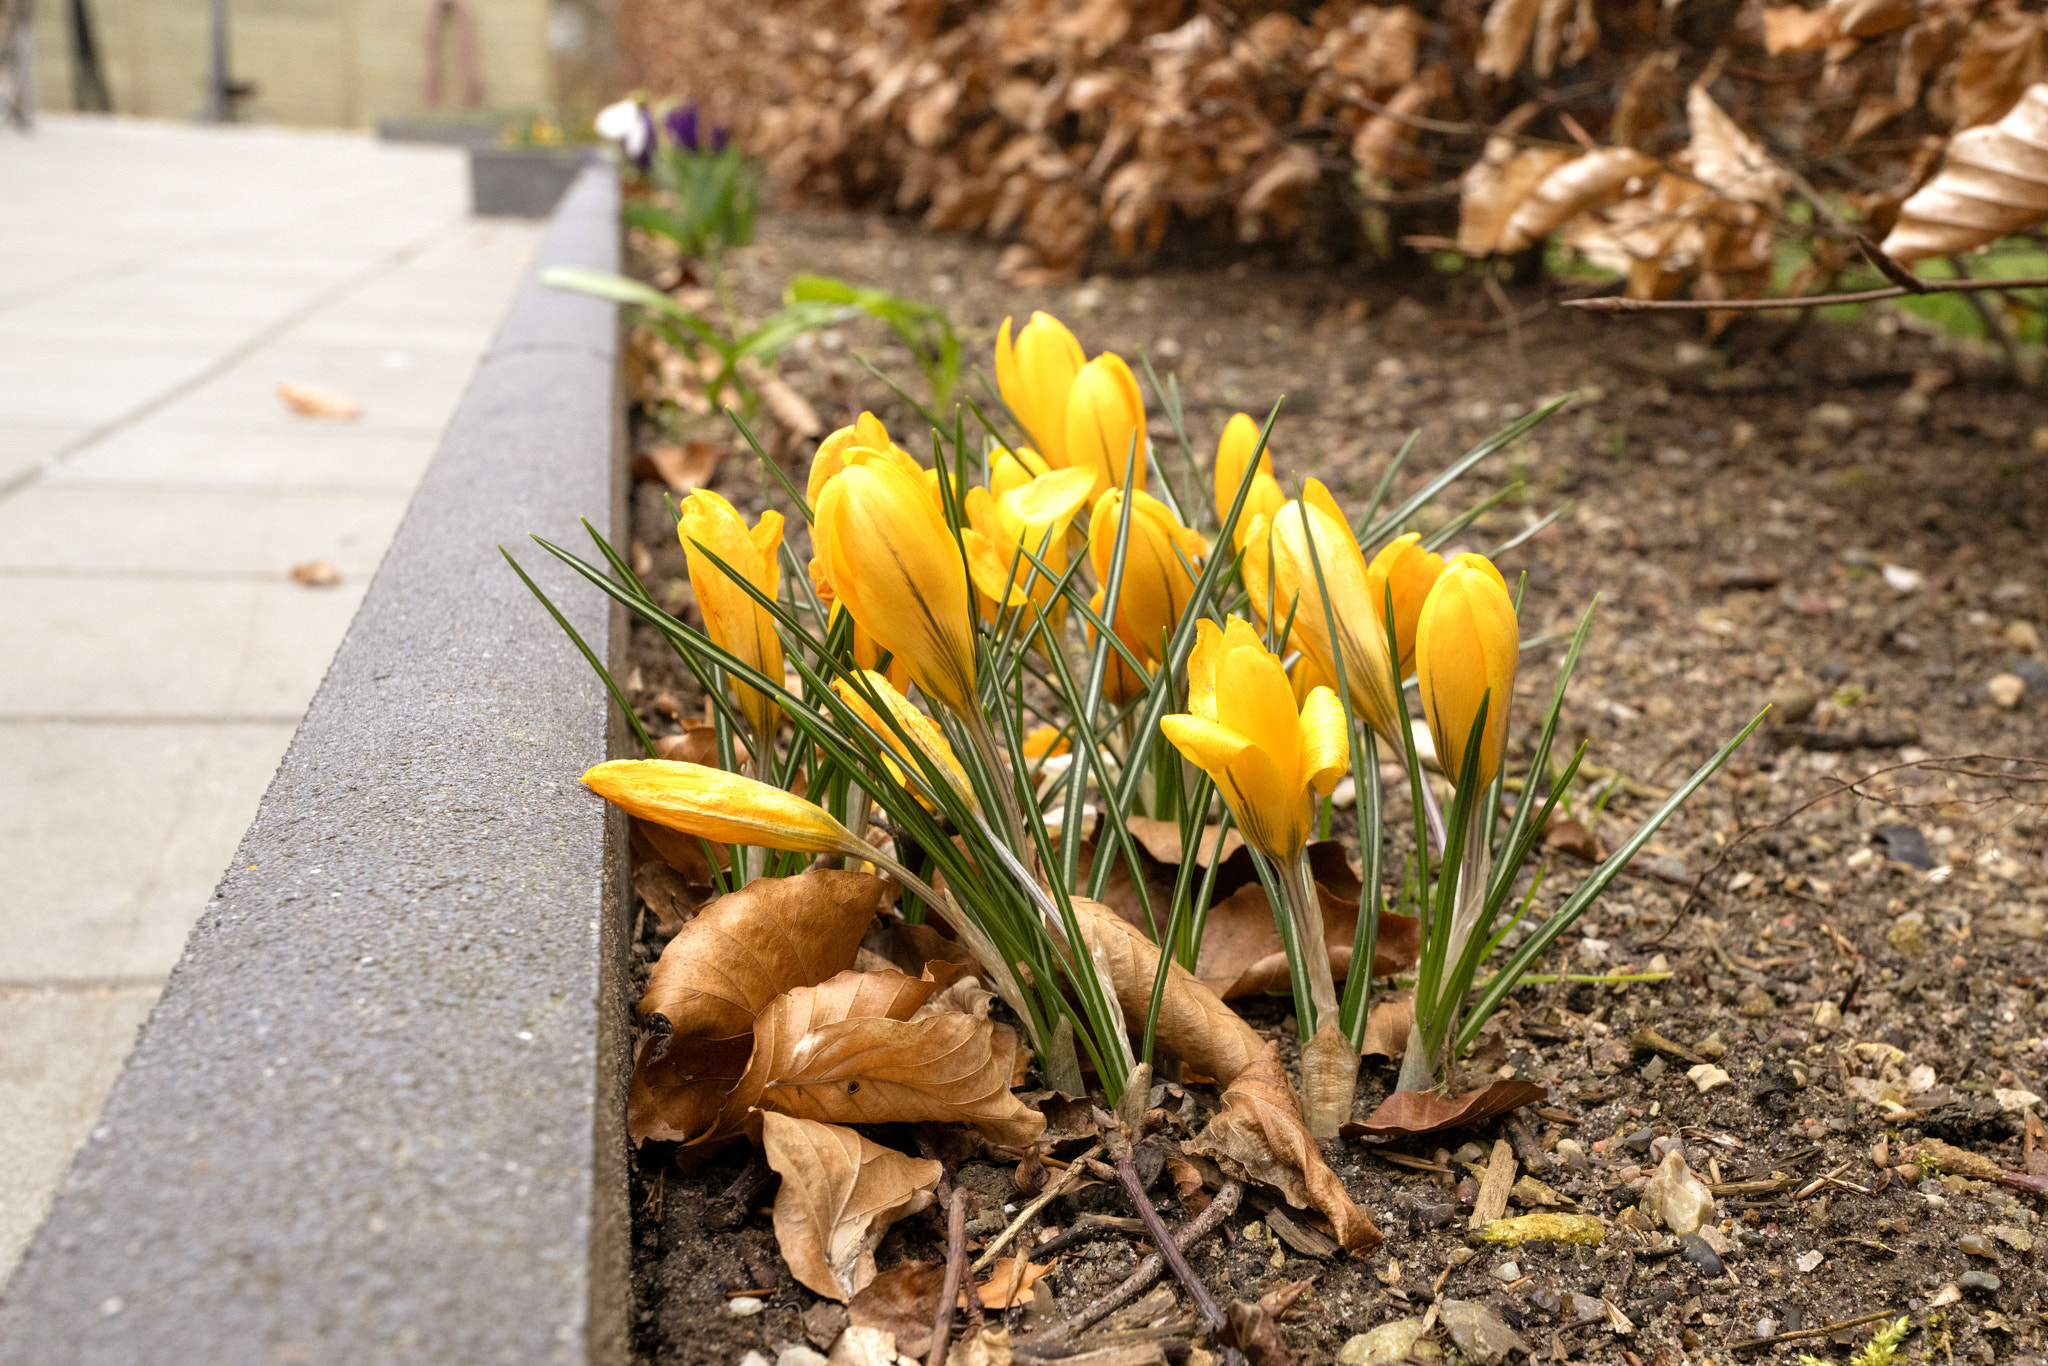 Sony a99 II sample photo. Yellow crocus flowers in the springtime photography